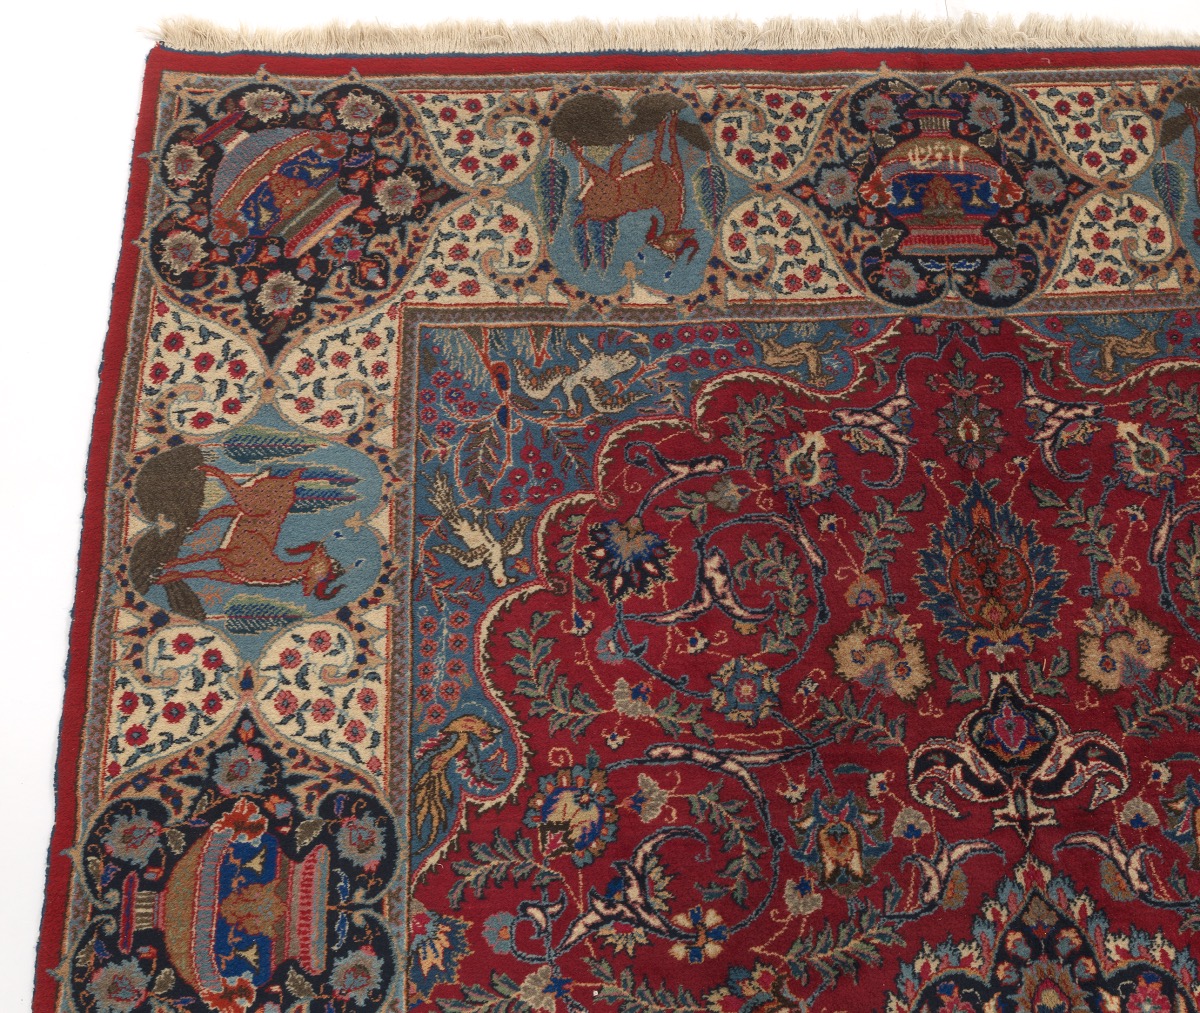 Semi-Antique Very Fine Hand-Knotted Signed Kashmar Pictorial Carpet - Image 4 of 6